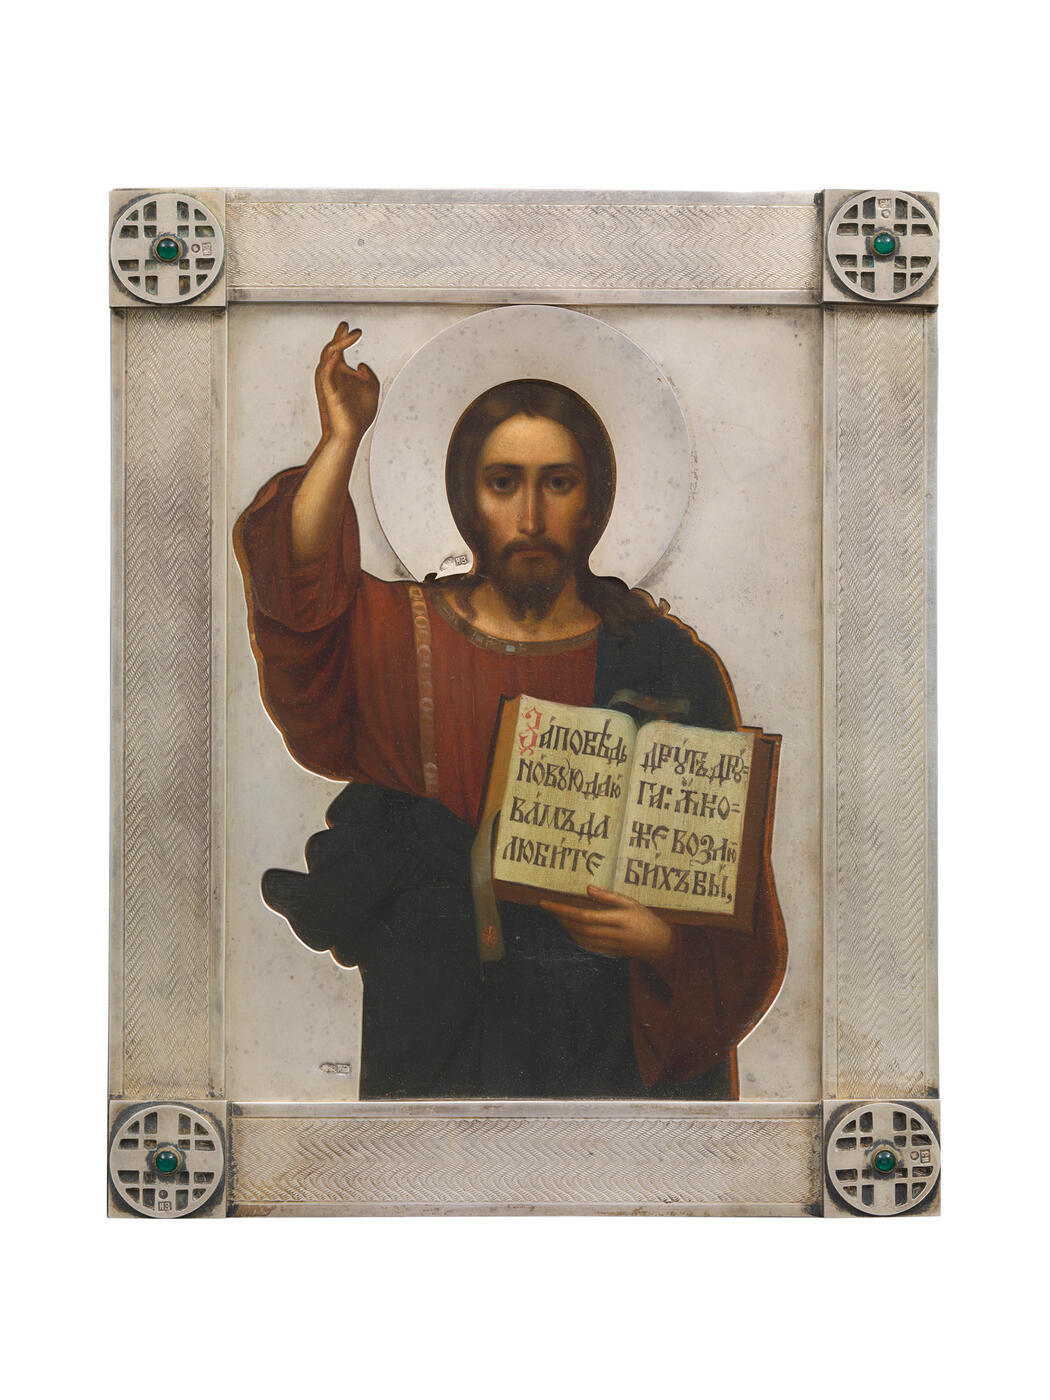 EARLY 20TH CENTURY, OIL ON PANEL, OKLAD STAMPED WITH MAKER'S MARK OF NIKOLAI ZVEREV IN CYRILLIC, MOSCOW, 1908-1917, 84 STANDARD